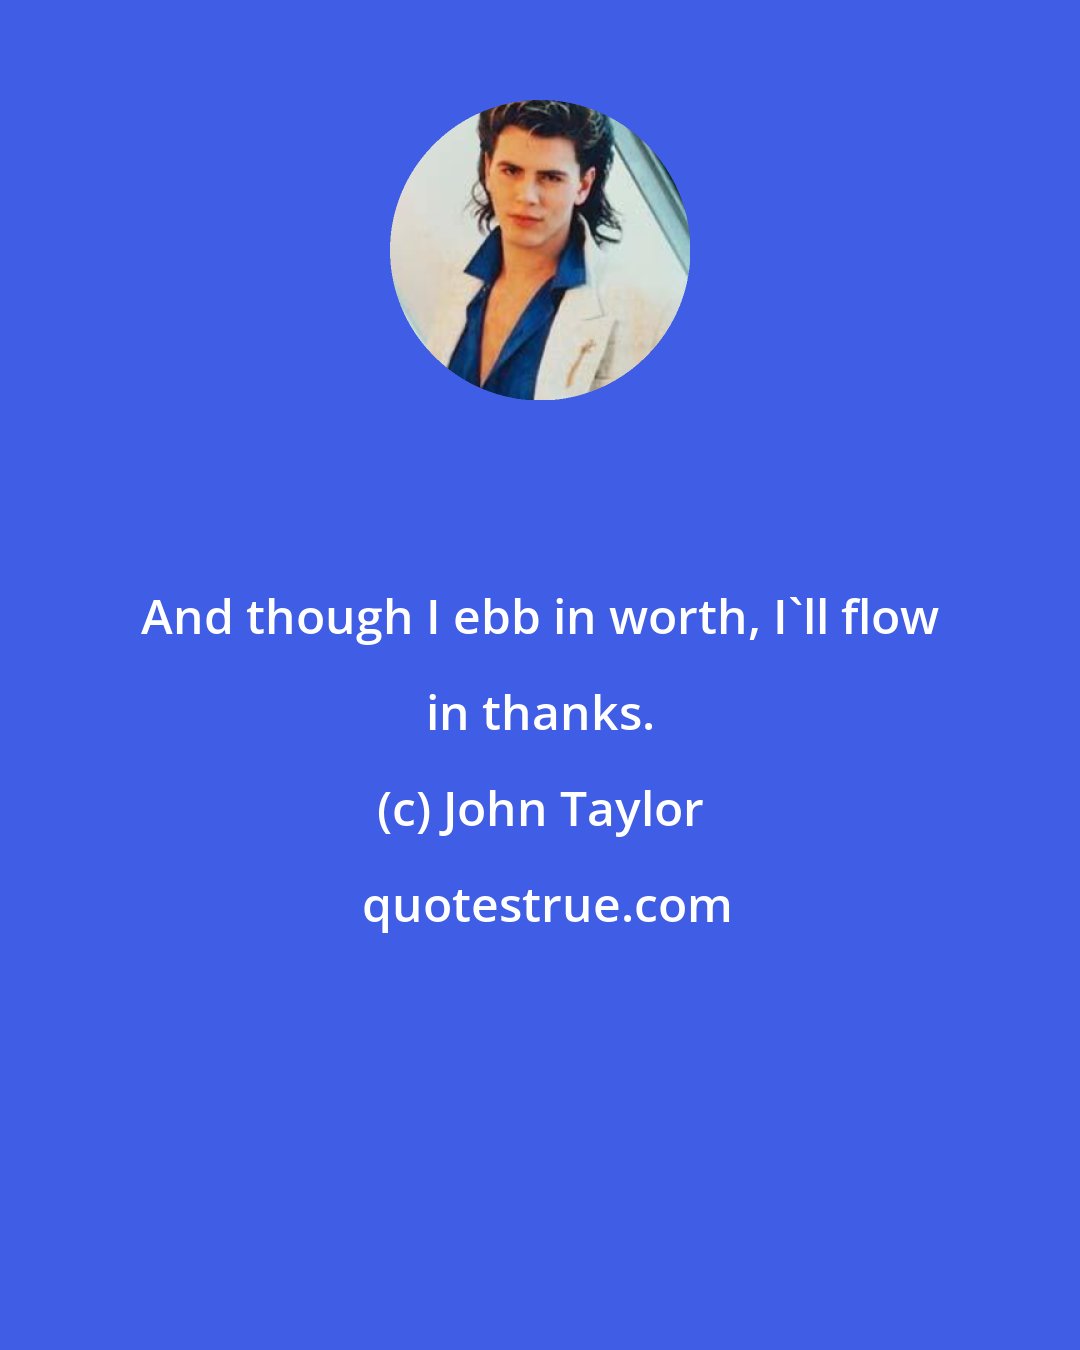 John Taylor: And though I ebb in worth, I'll flow in thanks.